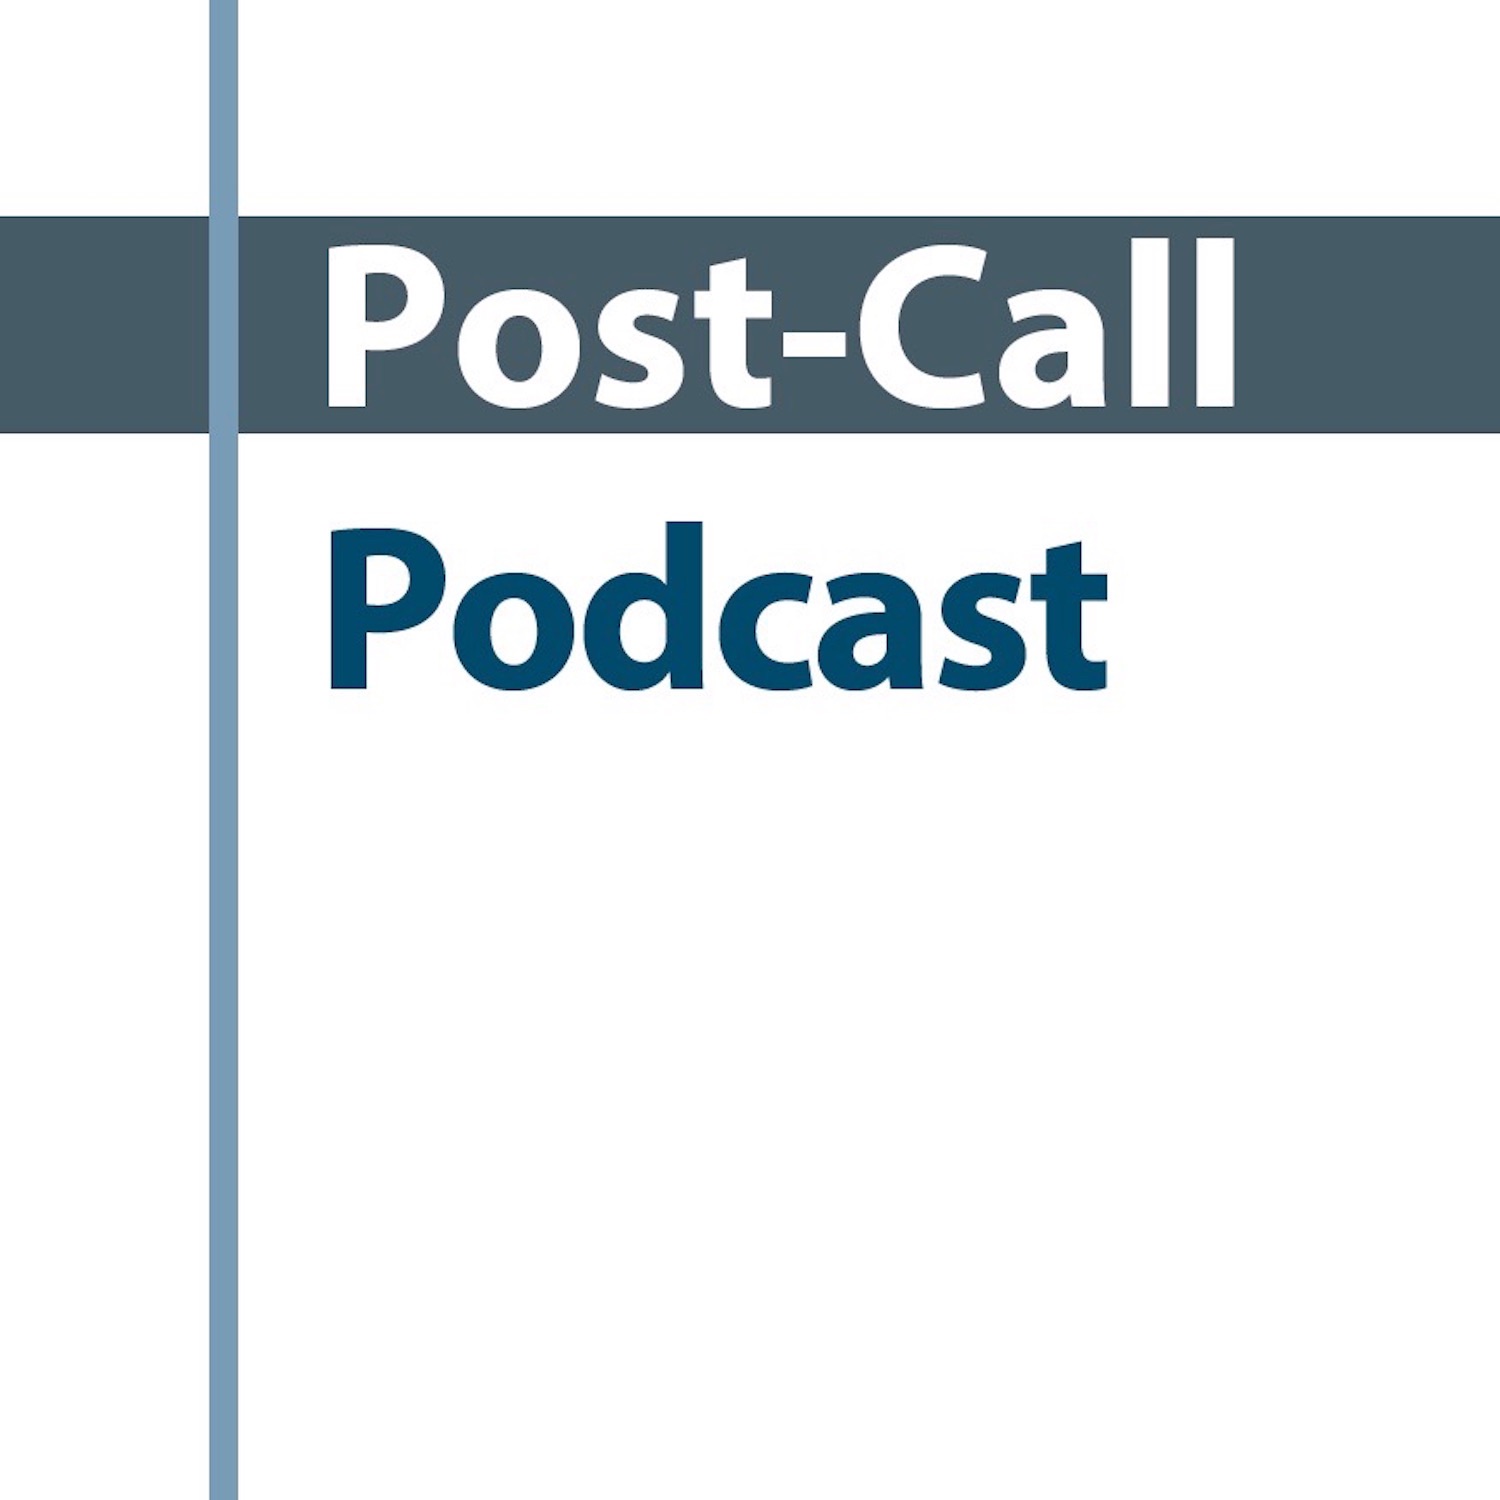 Post-Call Podcast